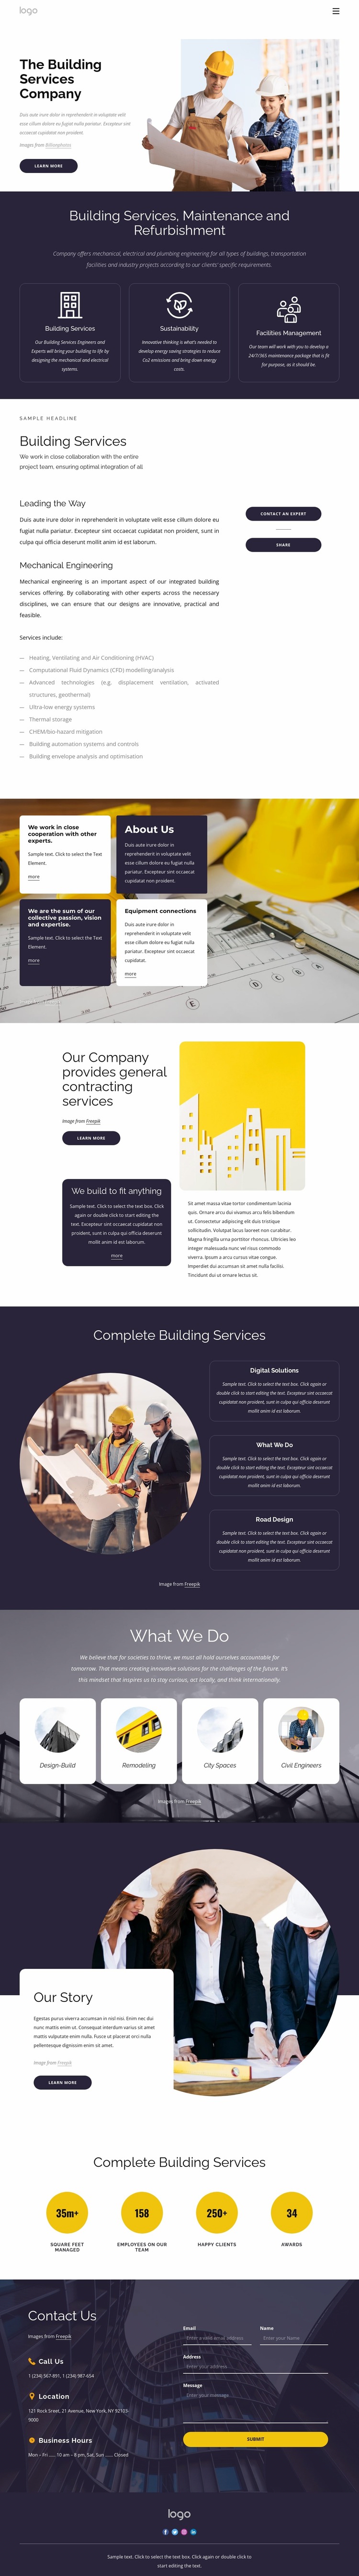 The building services company Website Mockup